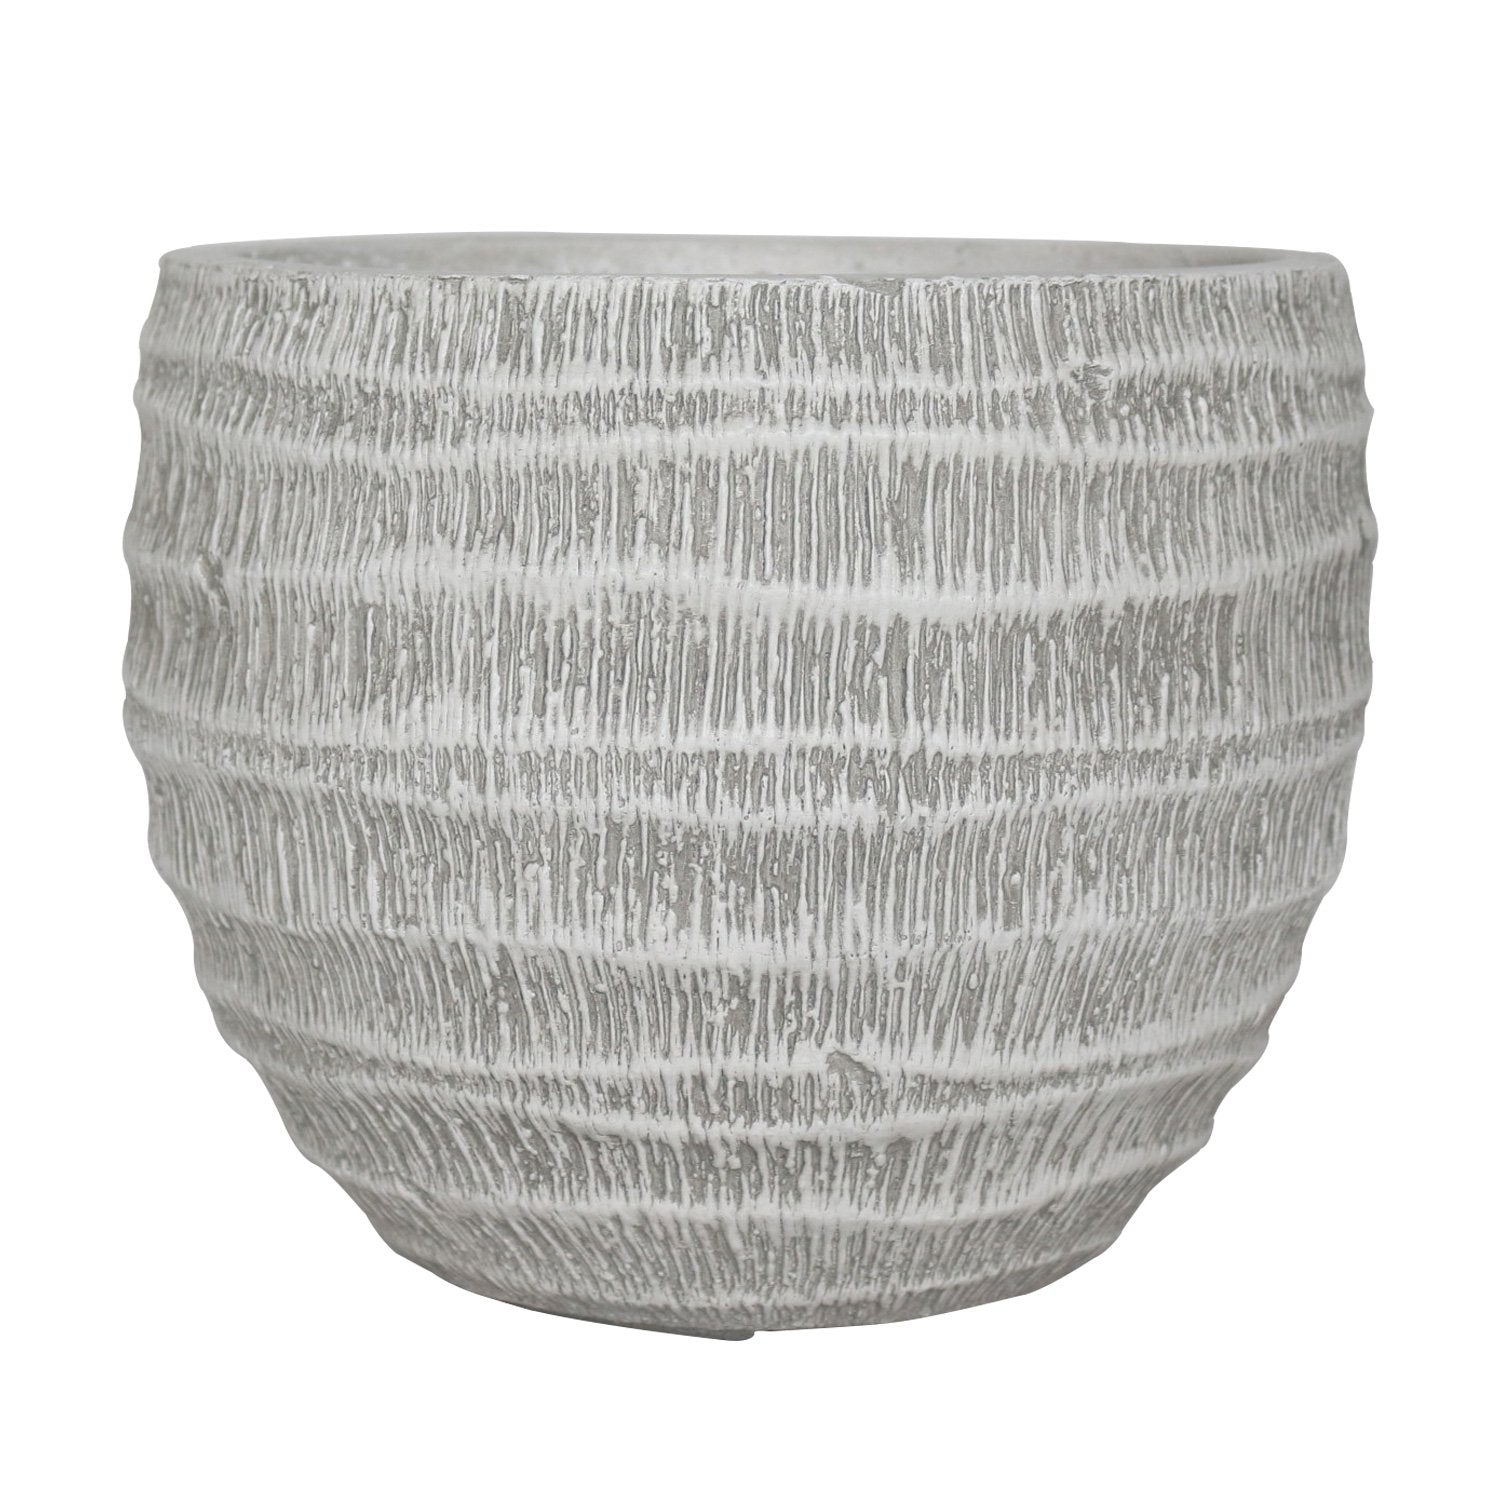 Straw Plaited Style White Washed Ball Planter by Idealist Lite D29 H22 cm, 10.1L - citiplants.com